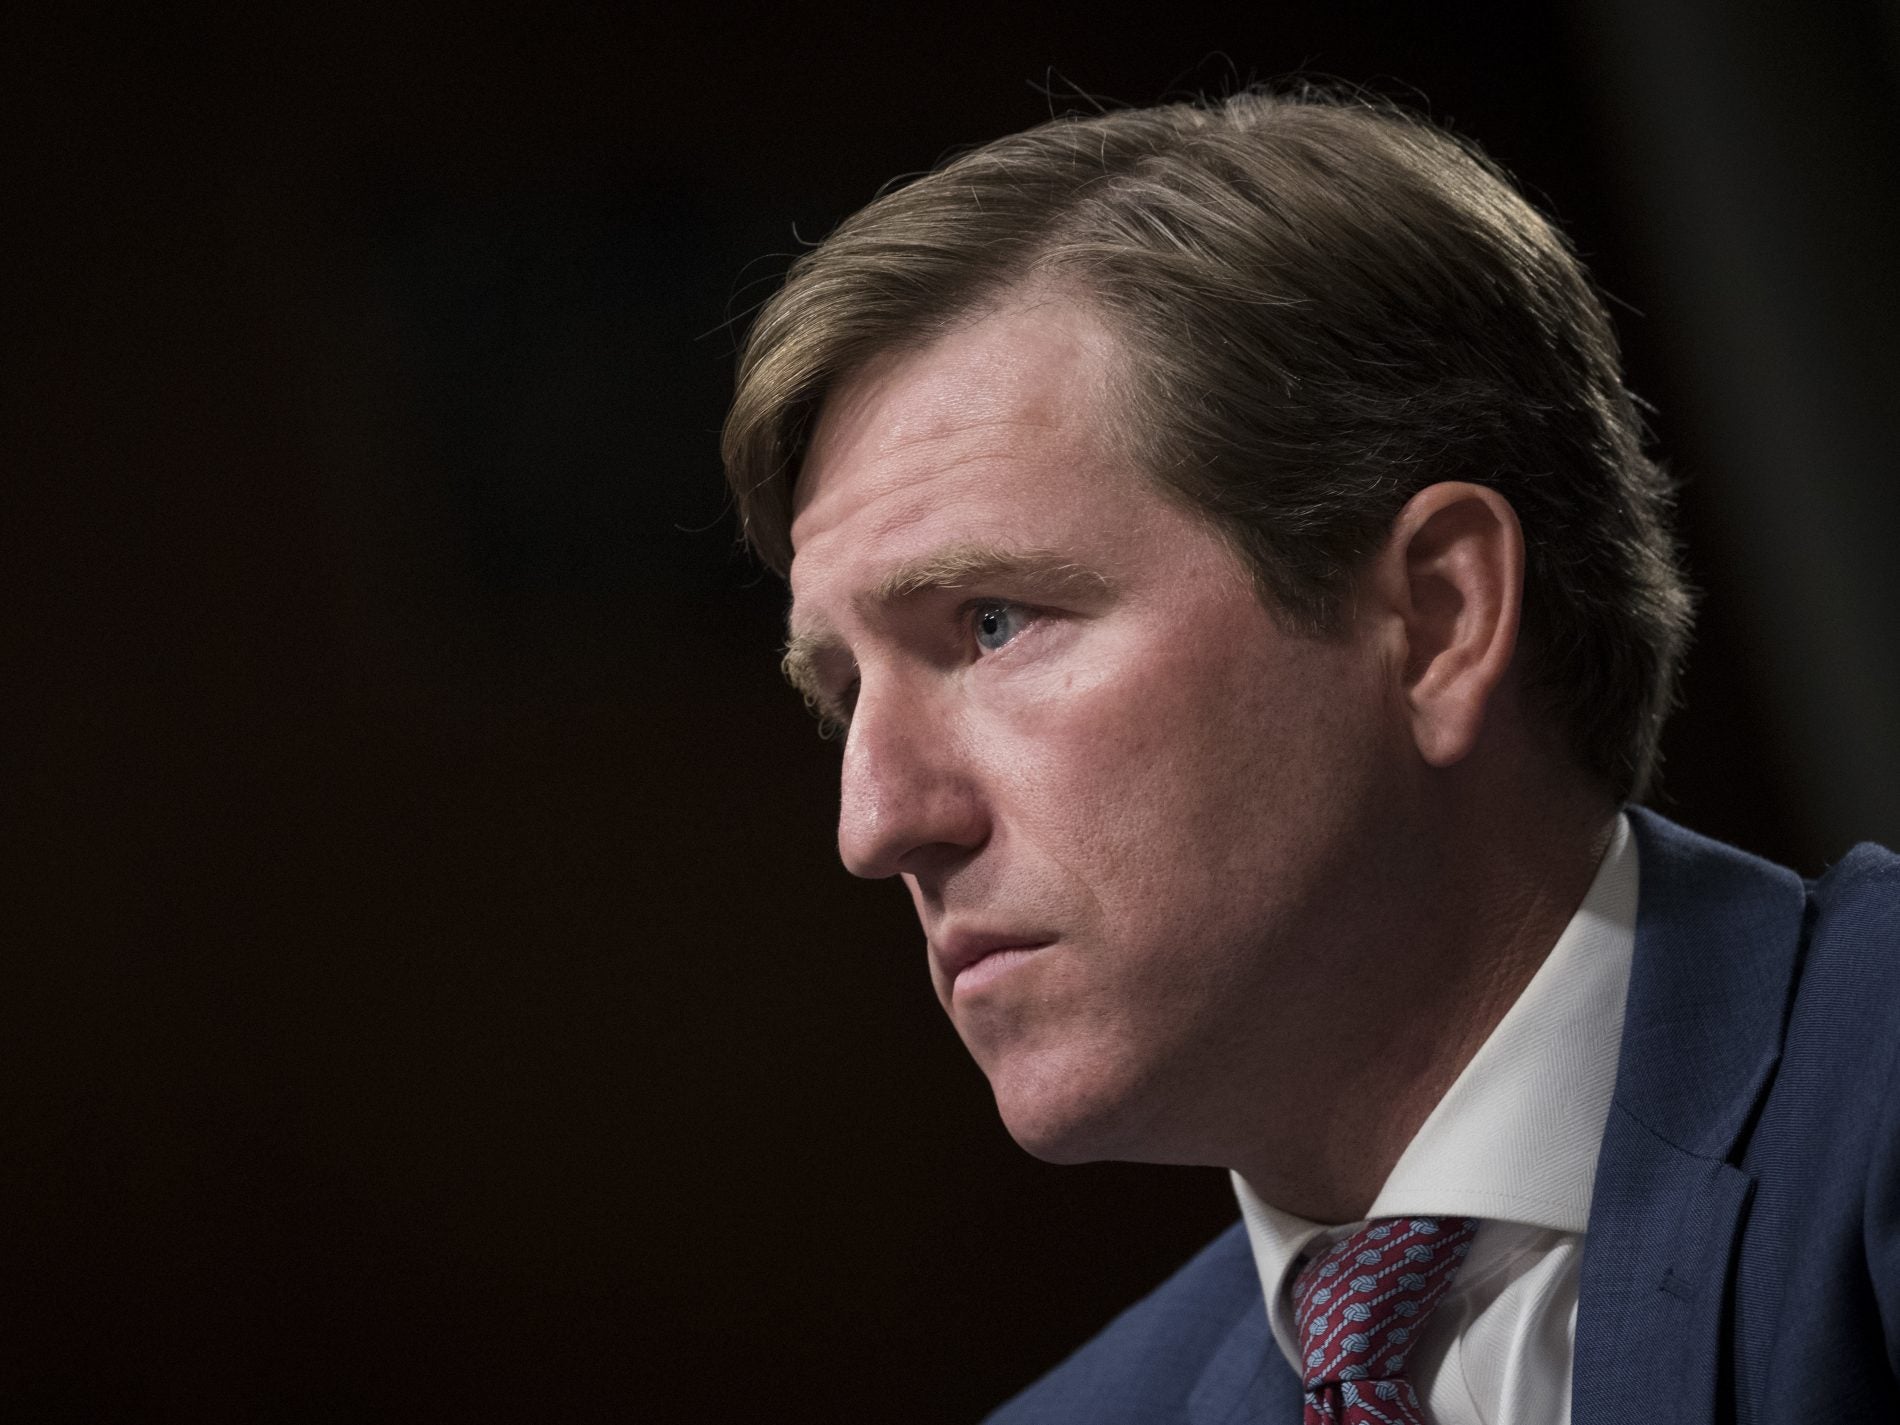 Christopher Krebs, who was in charge of protecting government networks during the Trump administration, said the SolarWinds breach used techniques that were "too novel" for the current system to catch. (Drew Angerer/Getty Images)